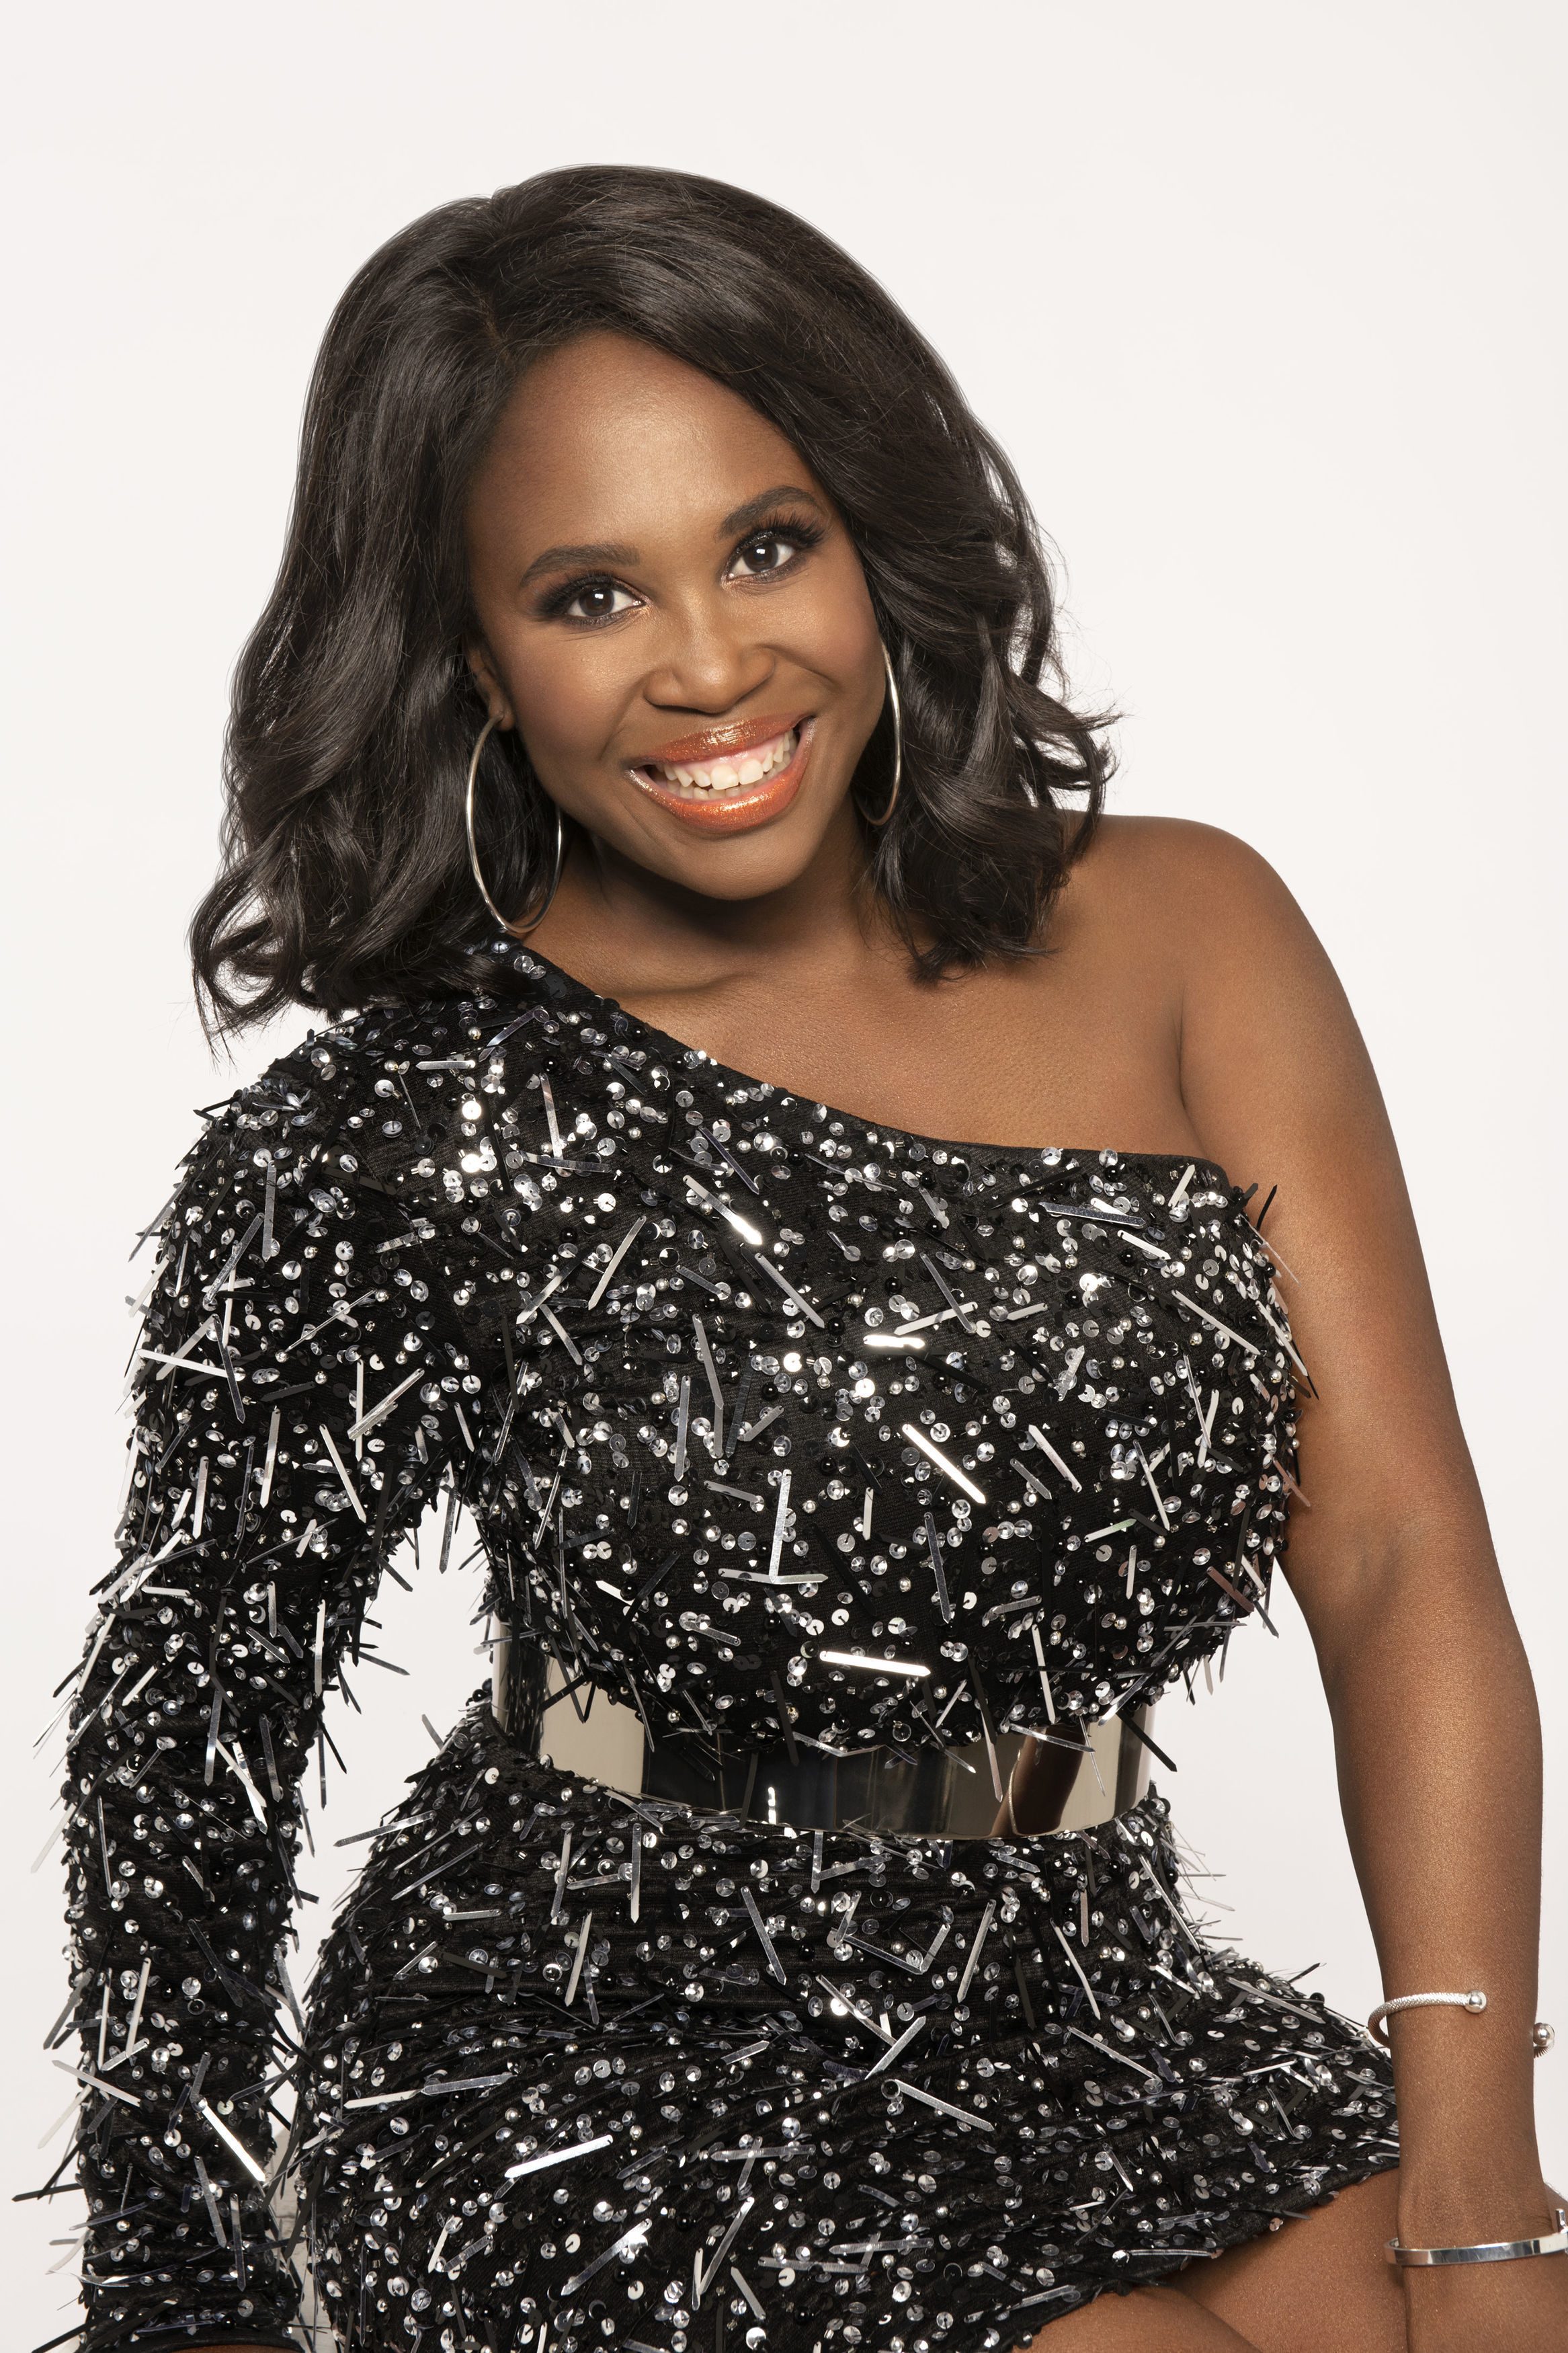 Fakes motsi mabuse Strictly Come